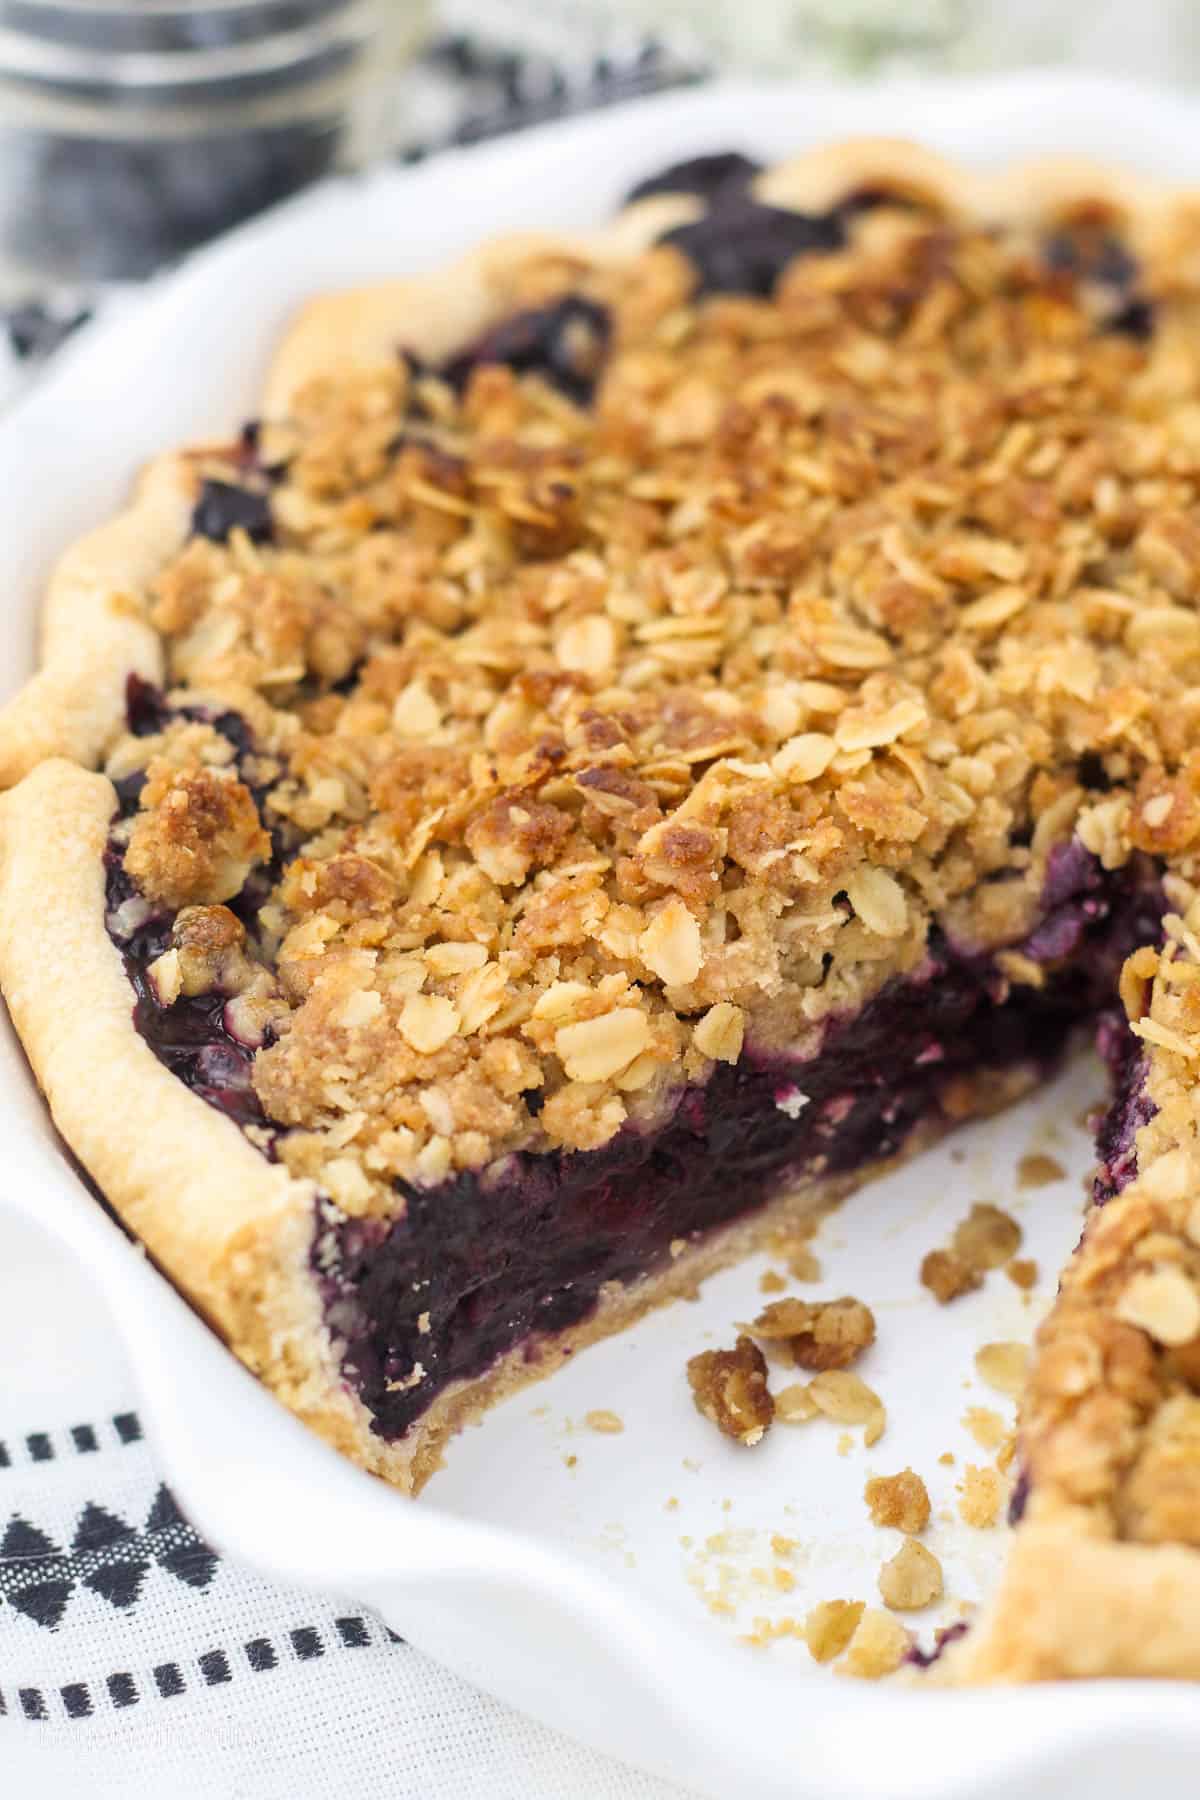 Blueberry crumble pie in a round pie dish with a slice missing.